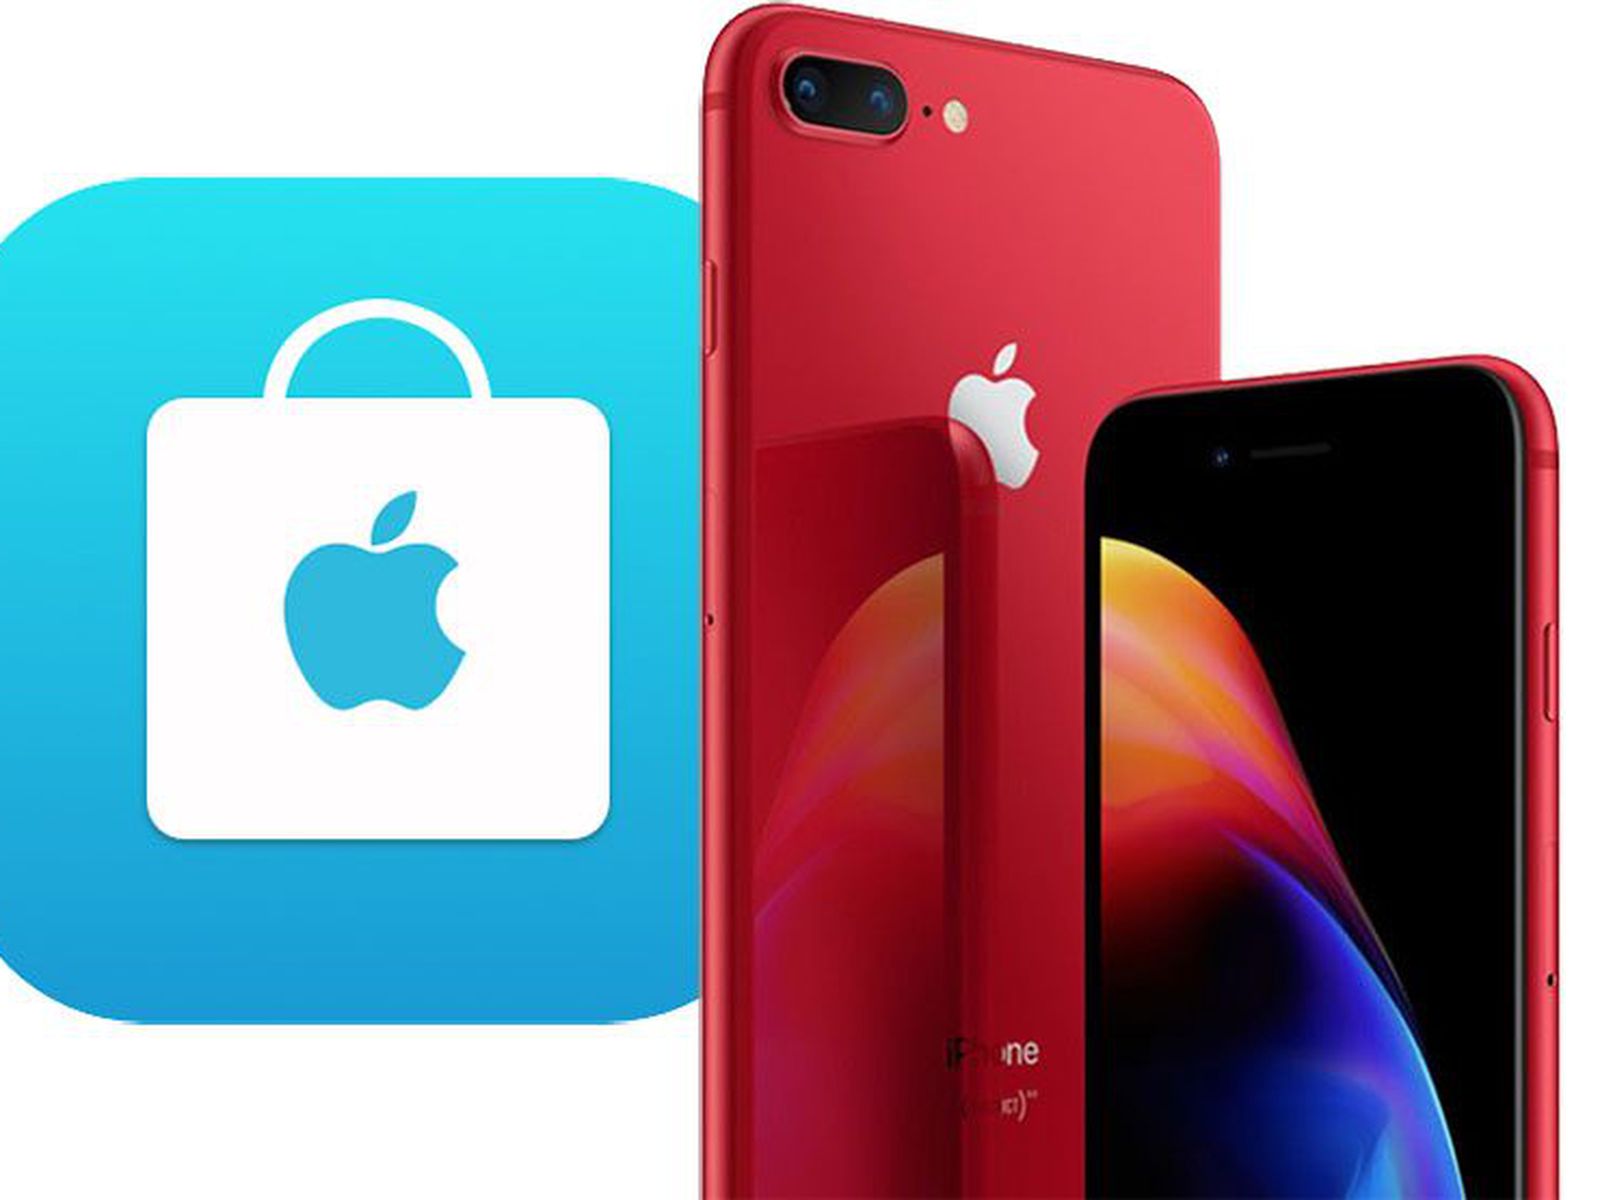 PRODUCT)RED iPhone 8 and iPhone 8 Plus Now Available to Order